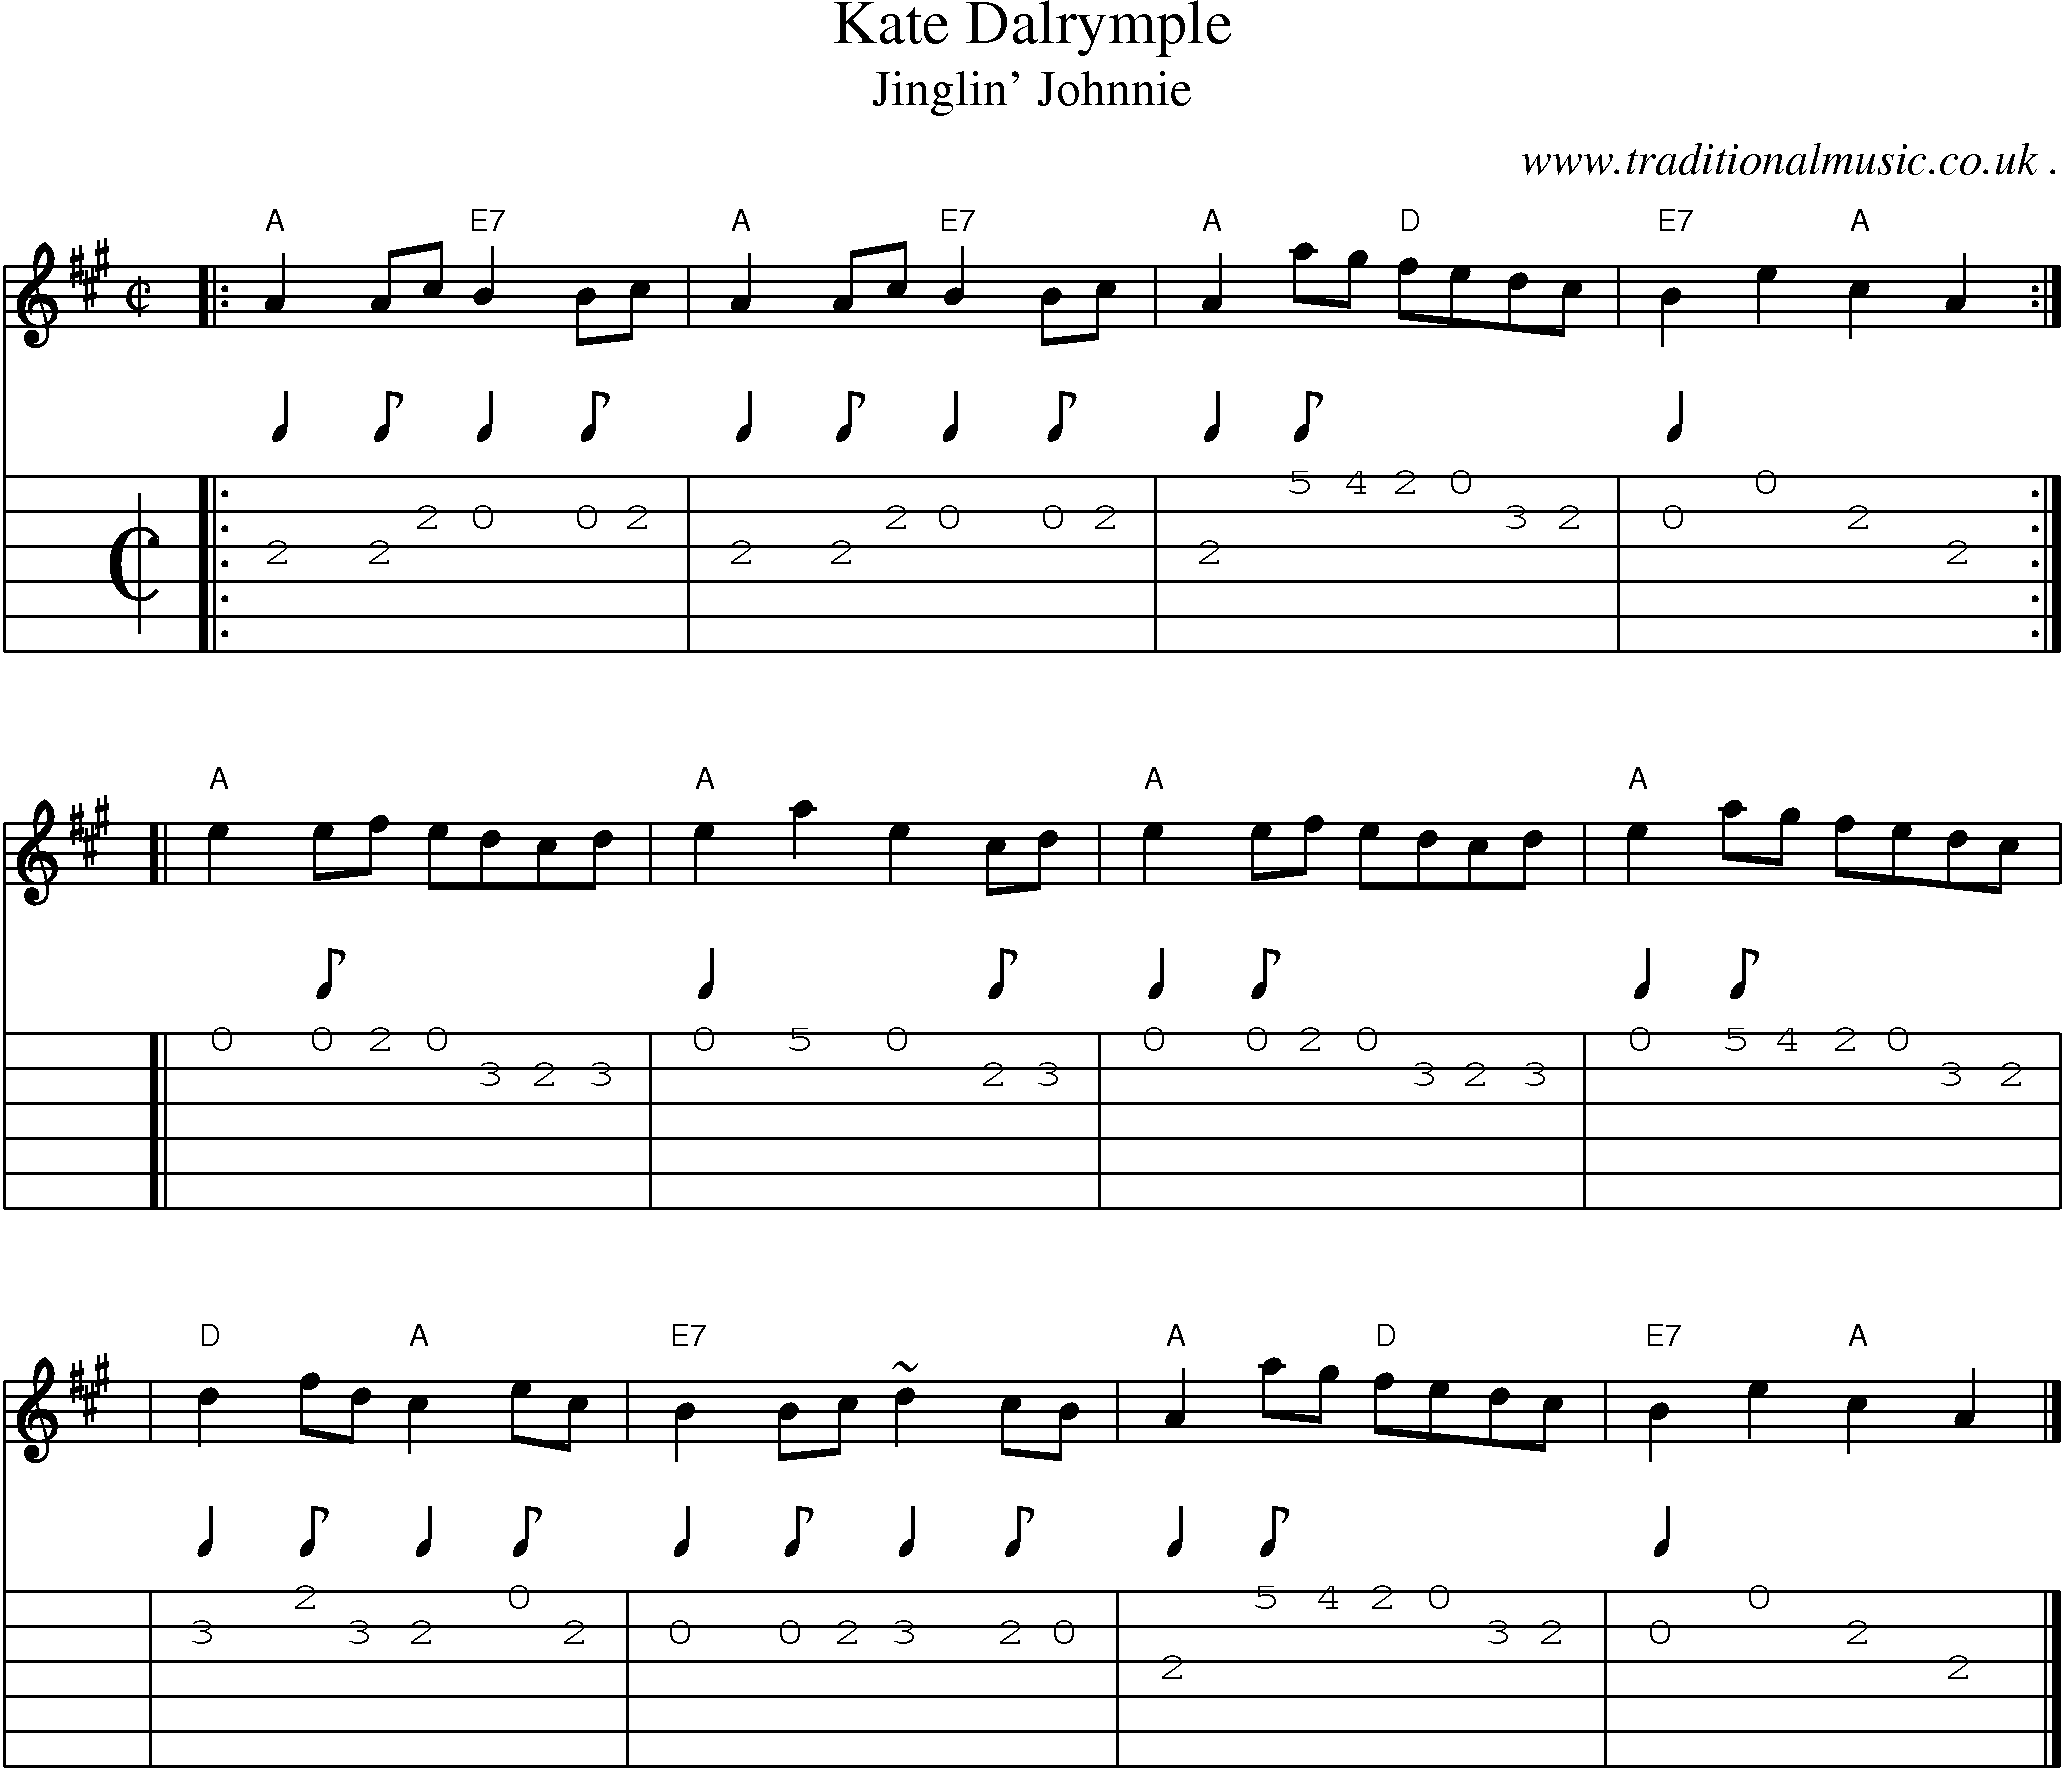 Sheet-music  score, Chords and Guitar Tabs for Kate Dalrymple